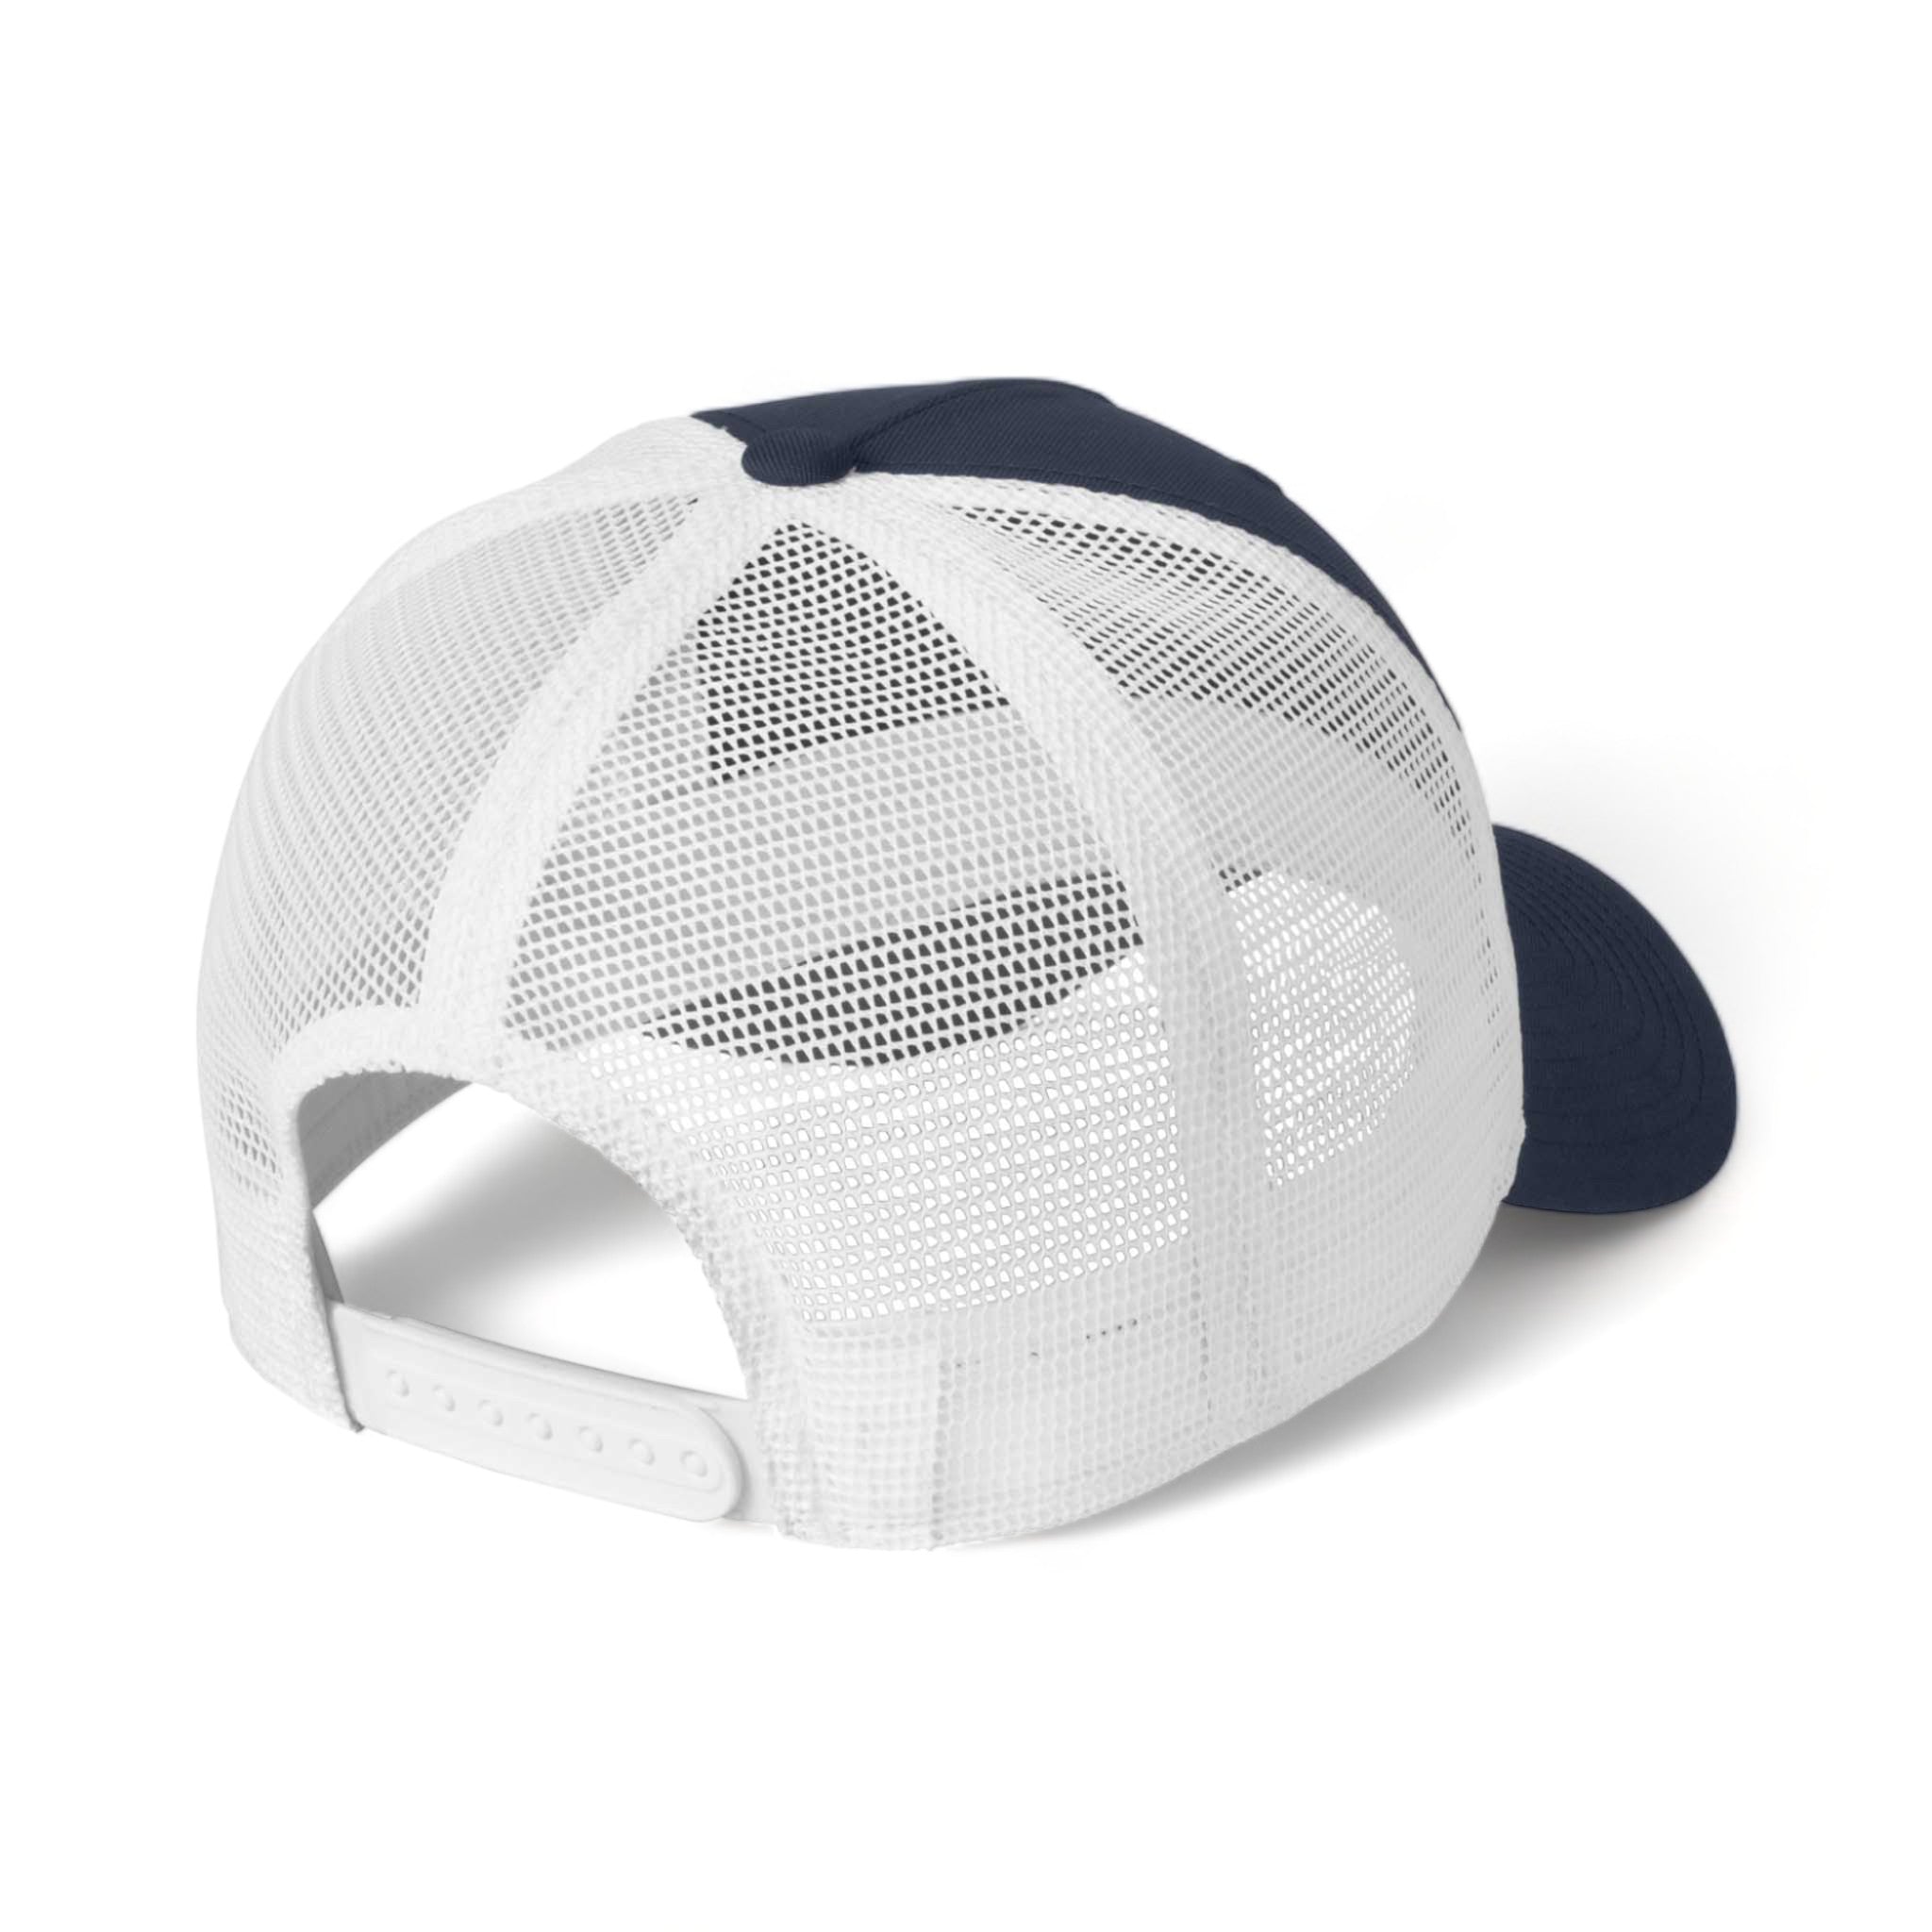 Back view of Nike NKFN9893 custom hat in navy and white